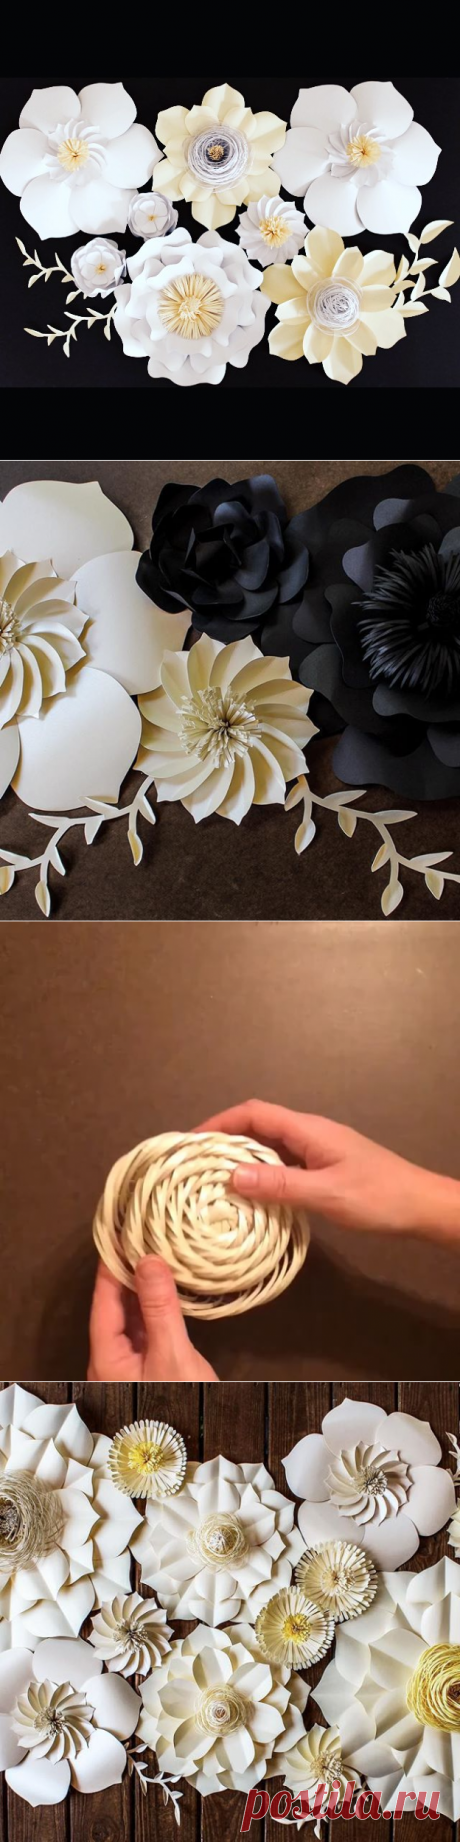 Paper Flowers 🌸 (@apaperevent) • Instagram photos and videos